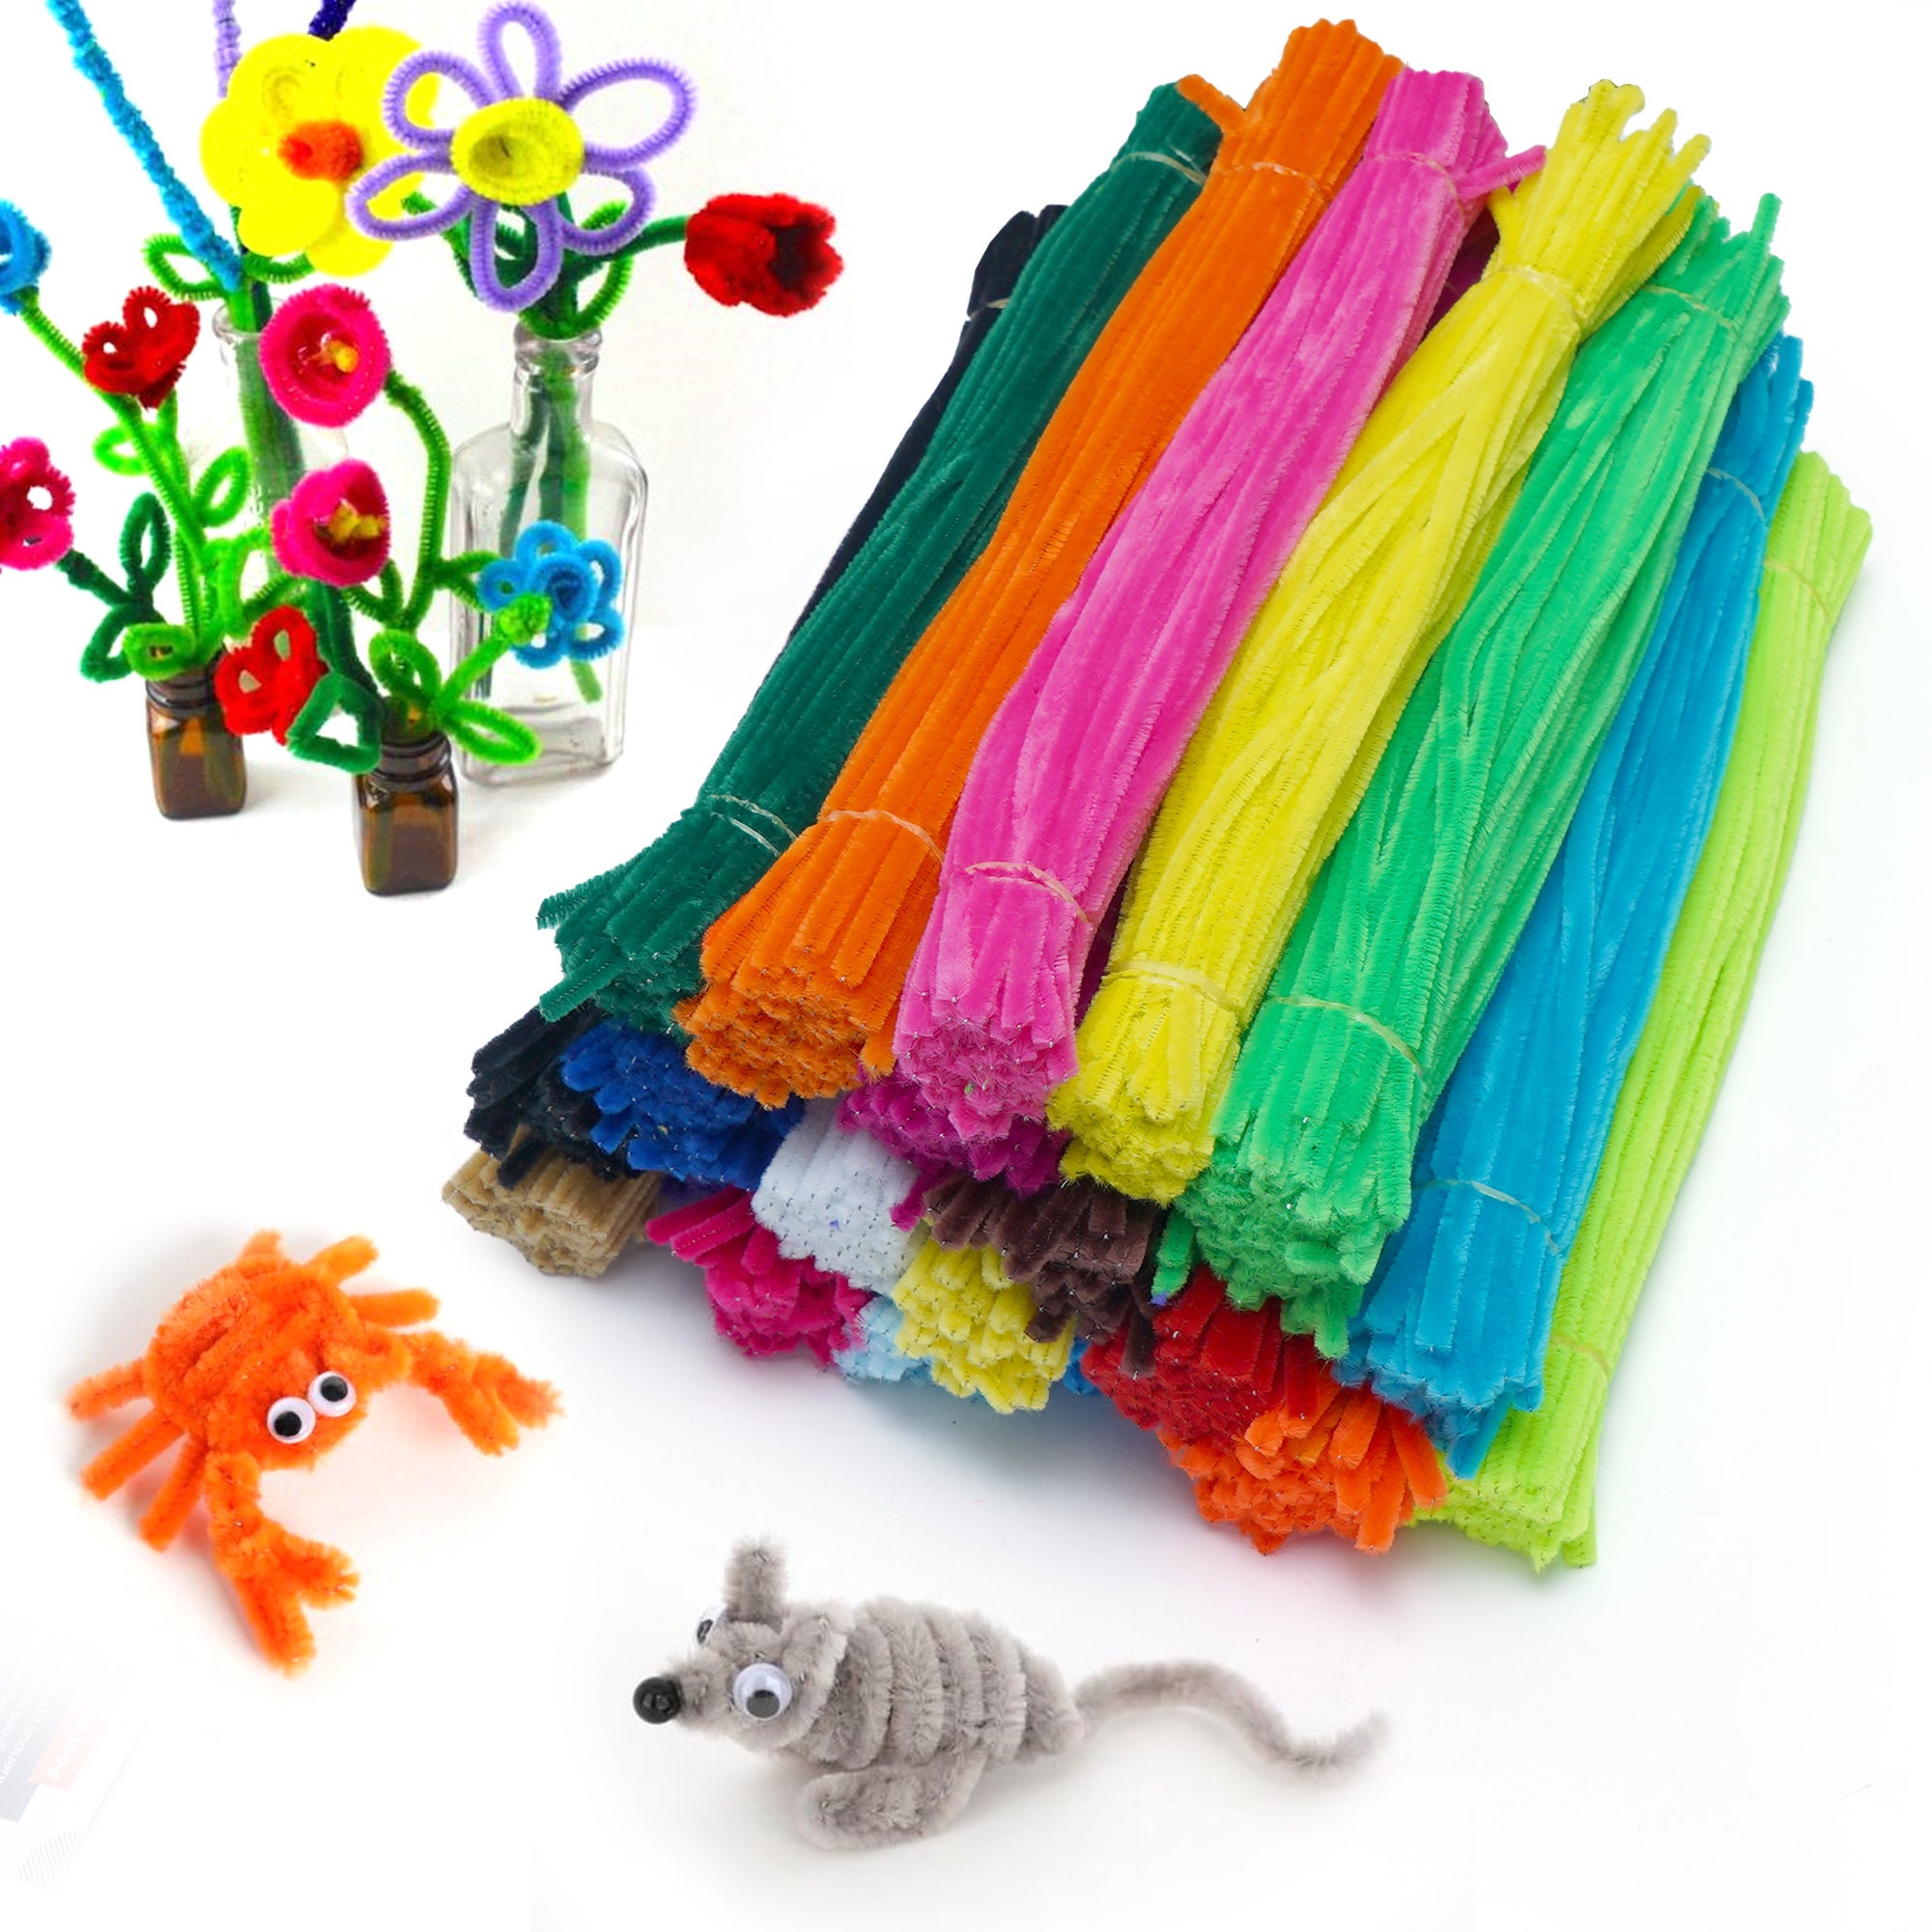 RIMOBUL Pipe Cleaners Craft Chenille Stems 100 Pcs Chenille Cleaners Kids  Fuzzy Sticks for DIY Art Creative Crafts Decorations, 6 mm x 12 Inch